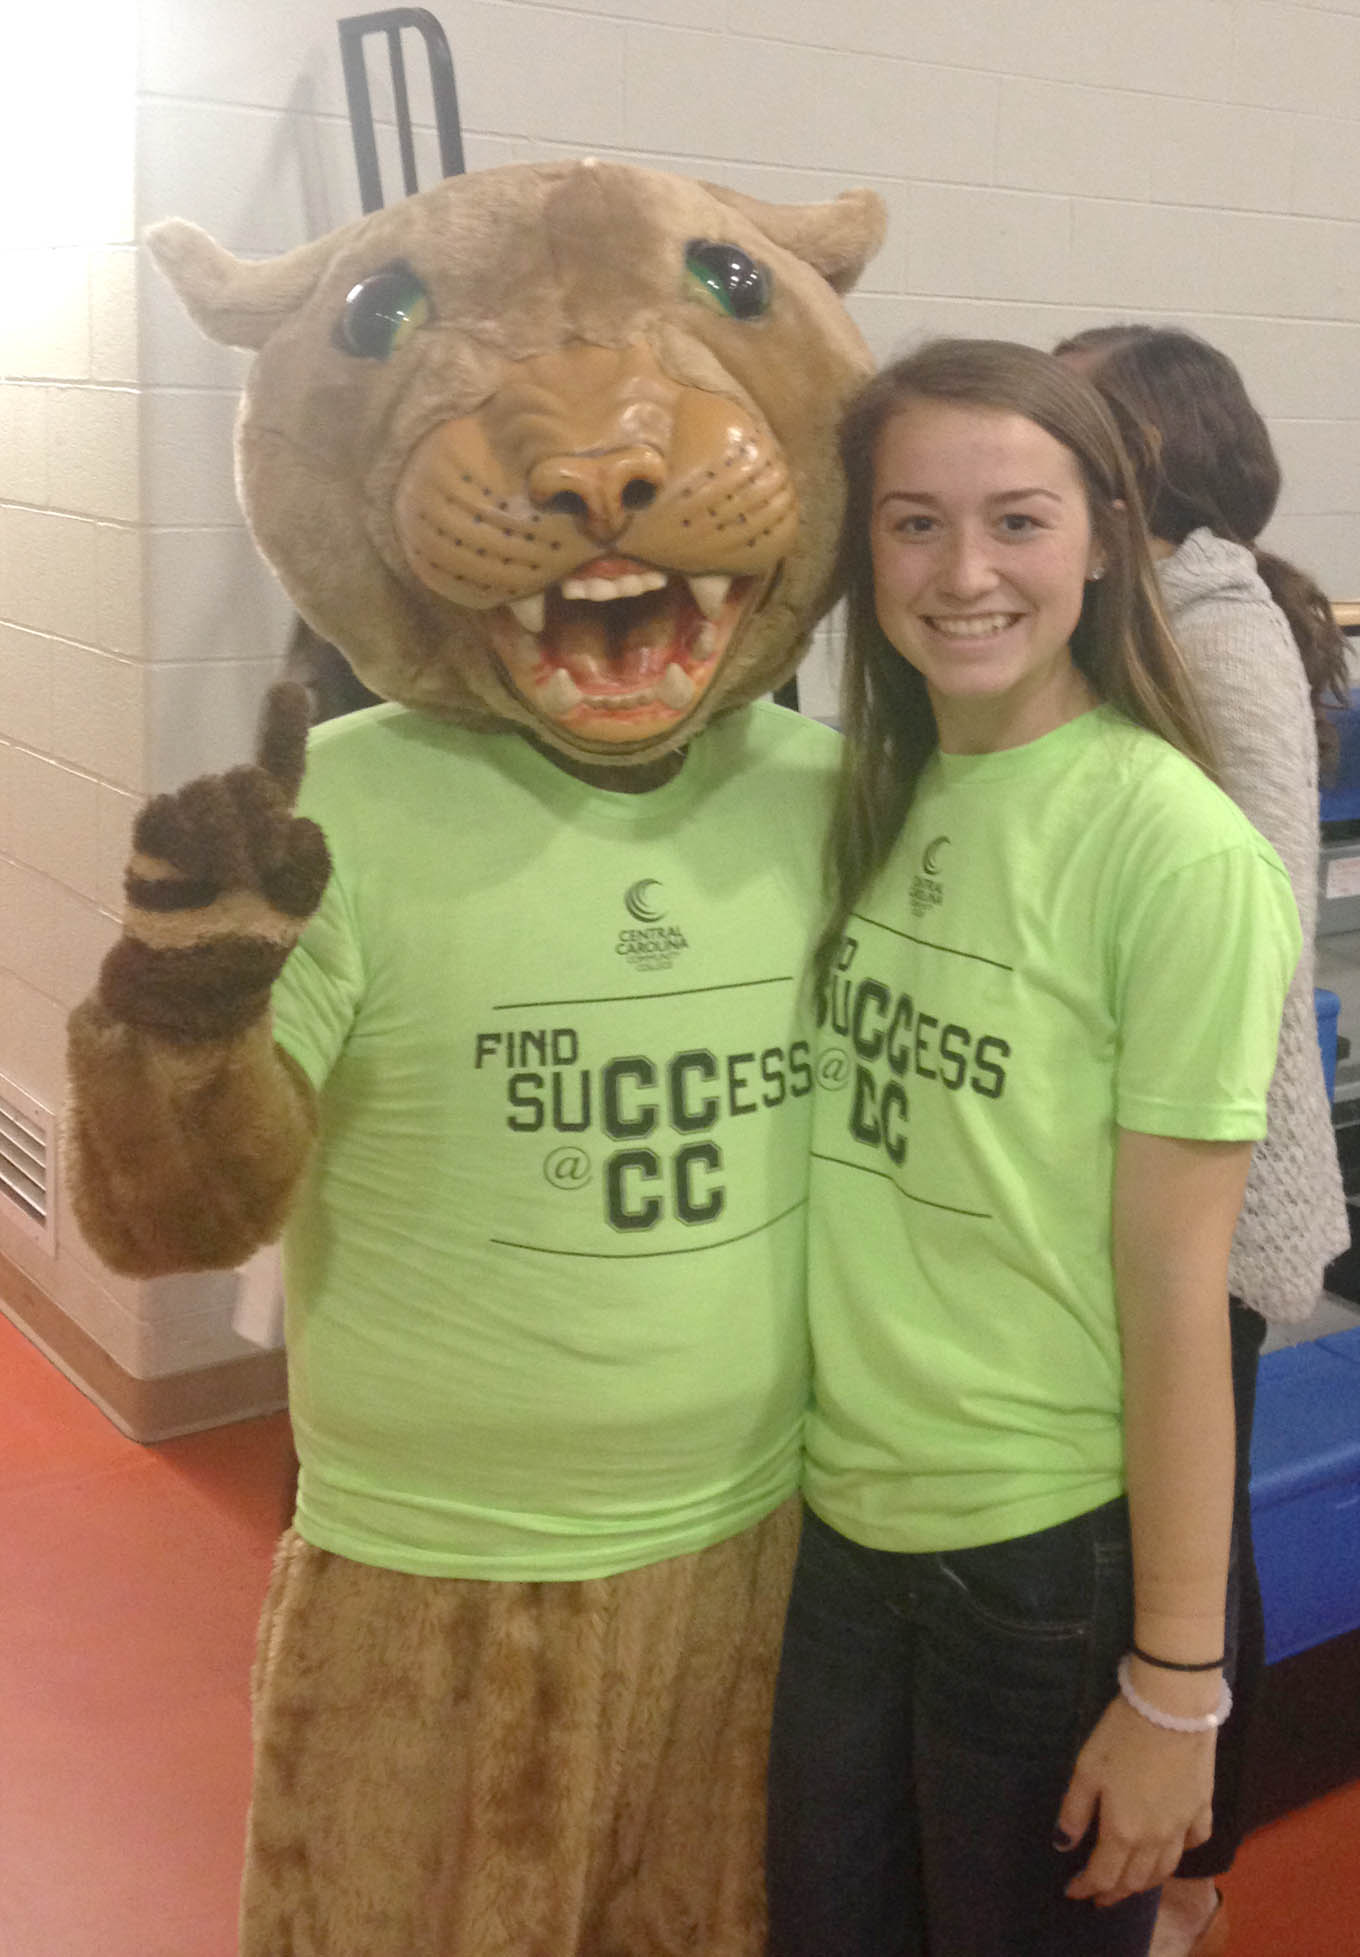 Read the full story, CCCC hosts Welcome Day event